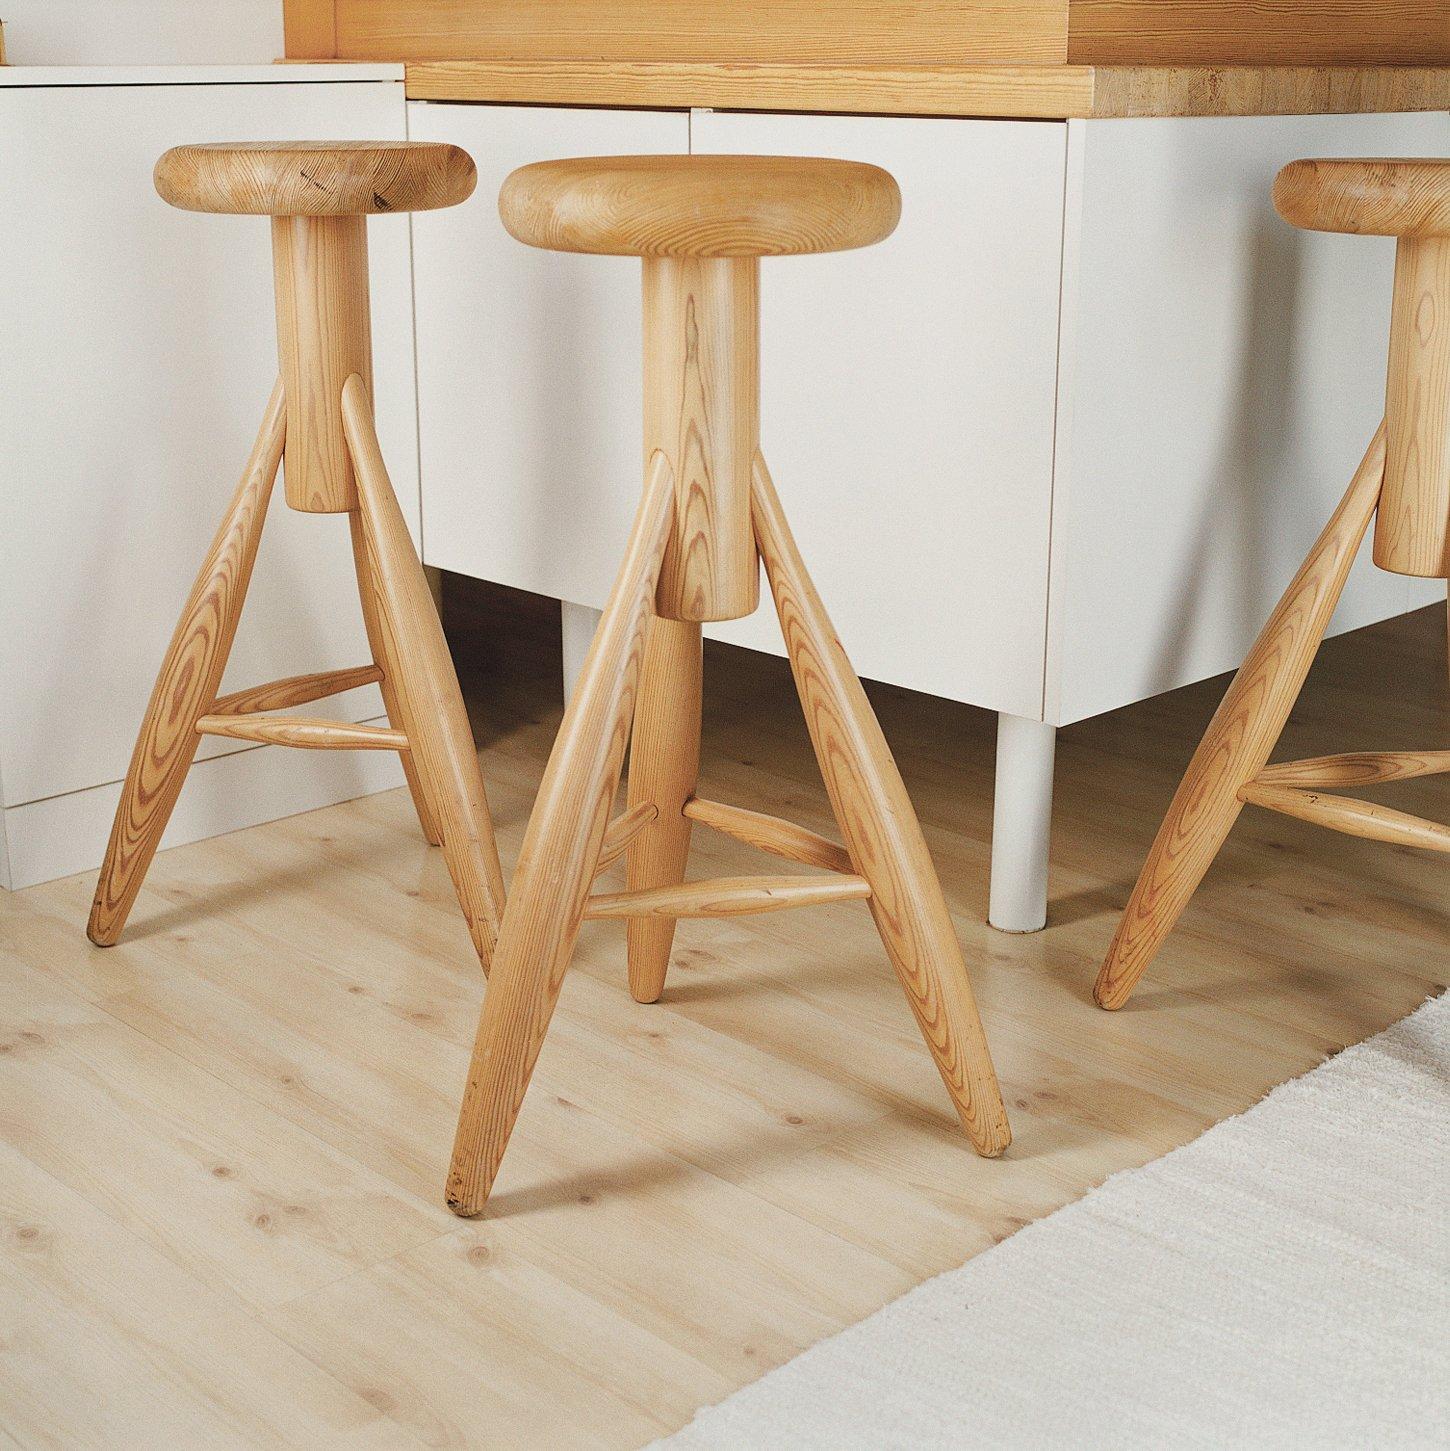 Authentic Rocket bar stool in oak by Eero Aarino & Artek. Crafted in solid oak and originally created for Finnish designer Eero Aarnio’s home kitchen, the bar stool has proved very popular since its introduction by Artek. Aarnio has created many